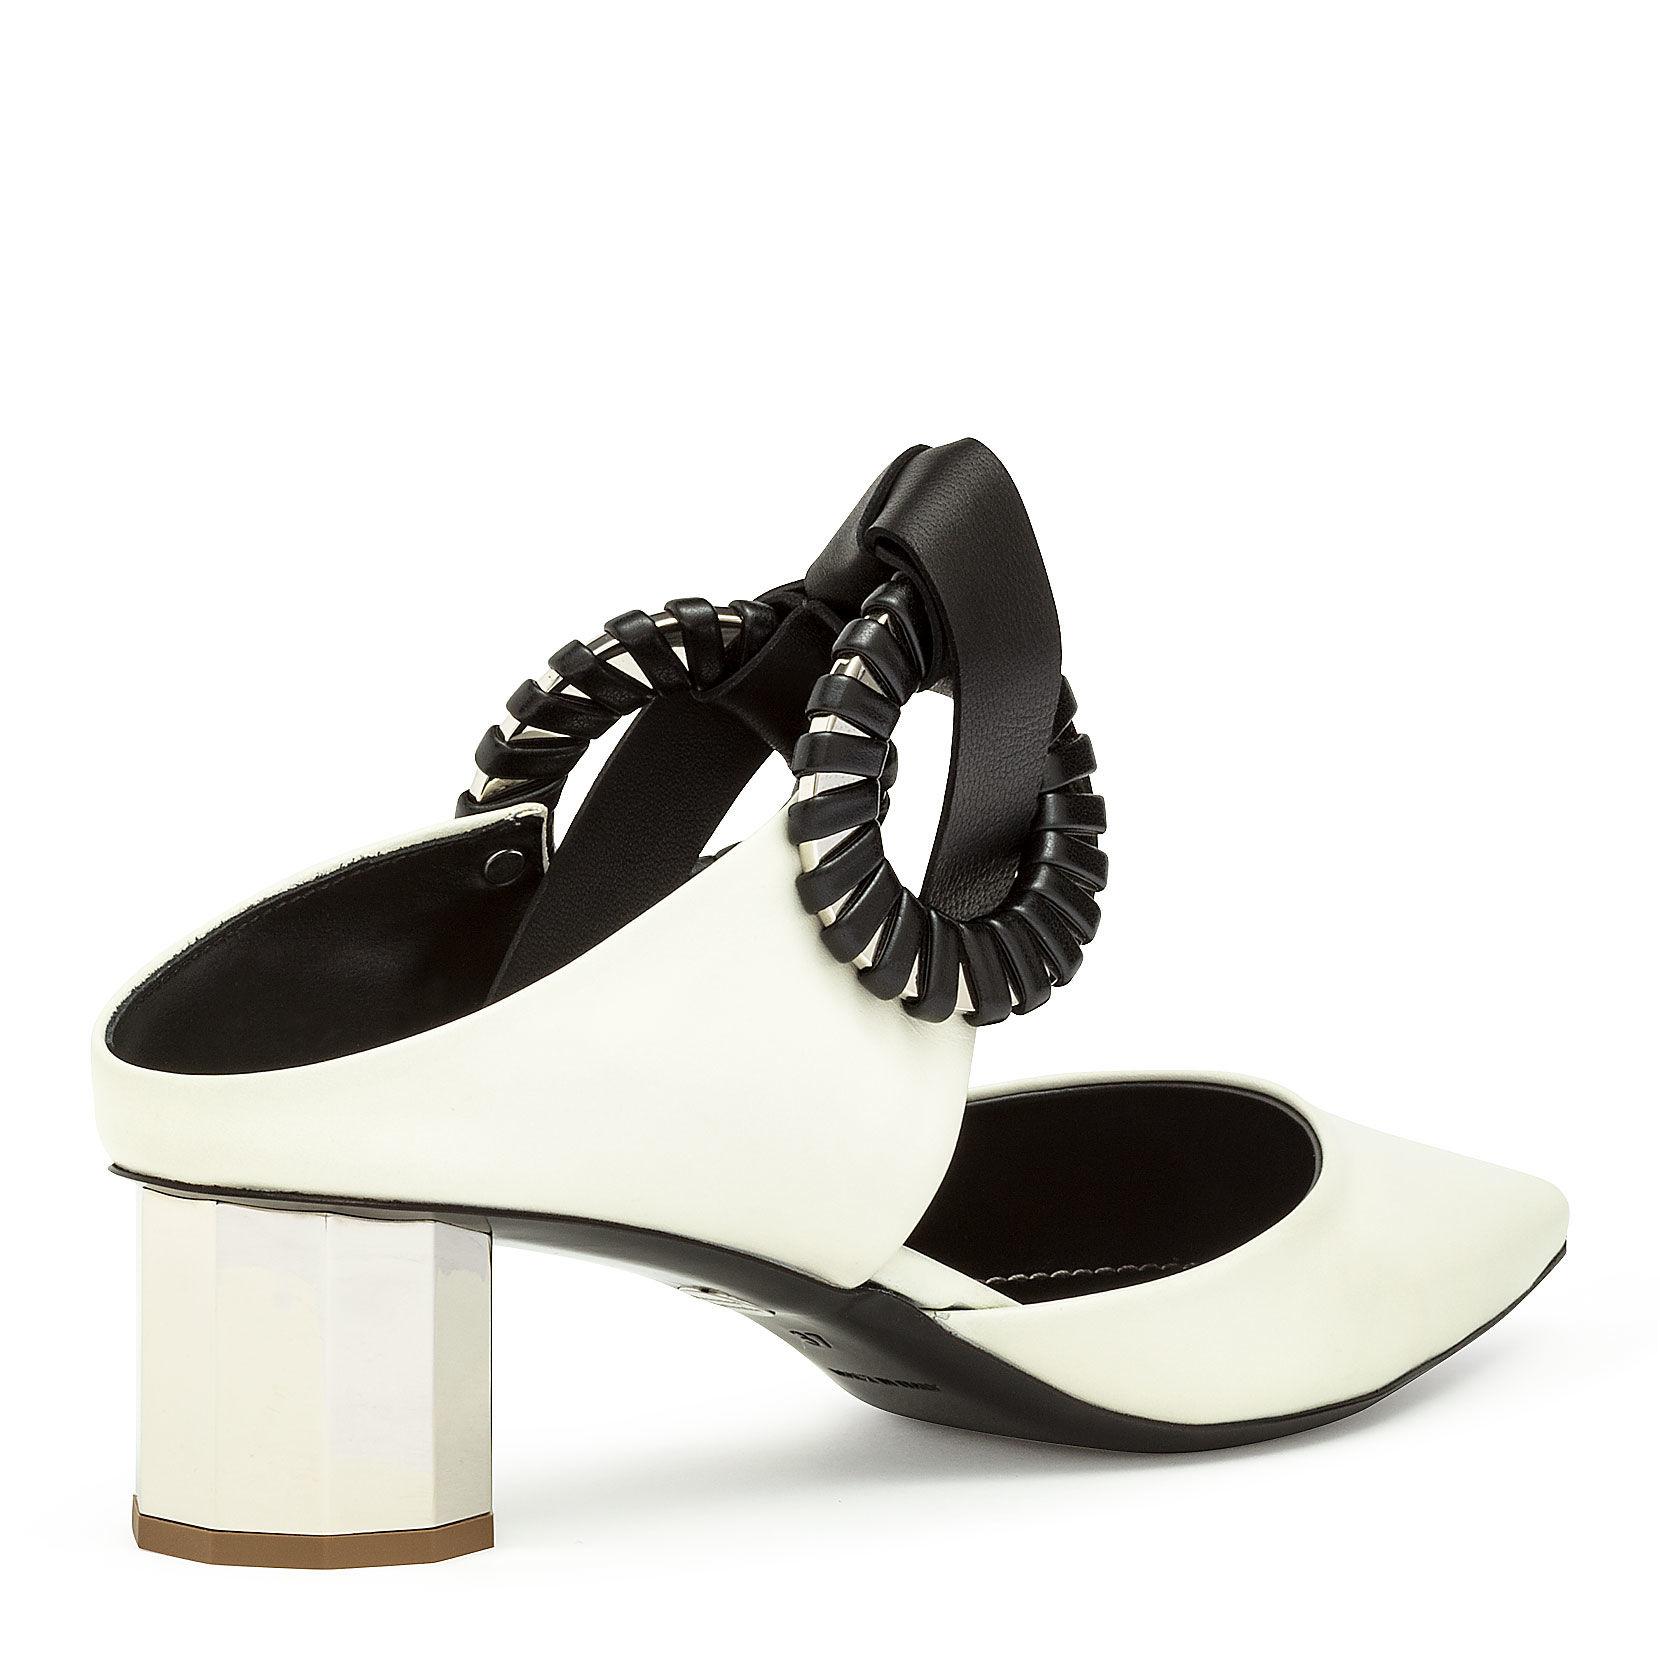 Proenza Schouler Grommet White Leather Mules - Lyst